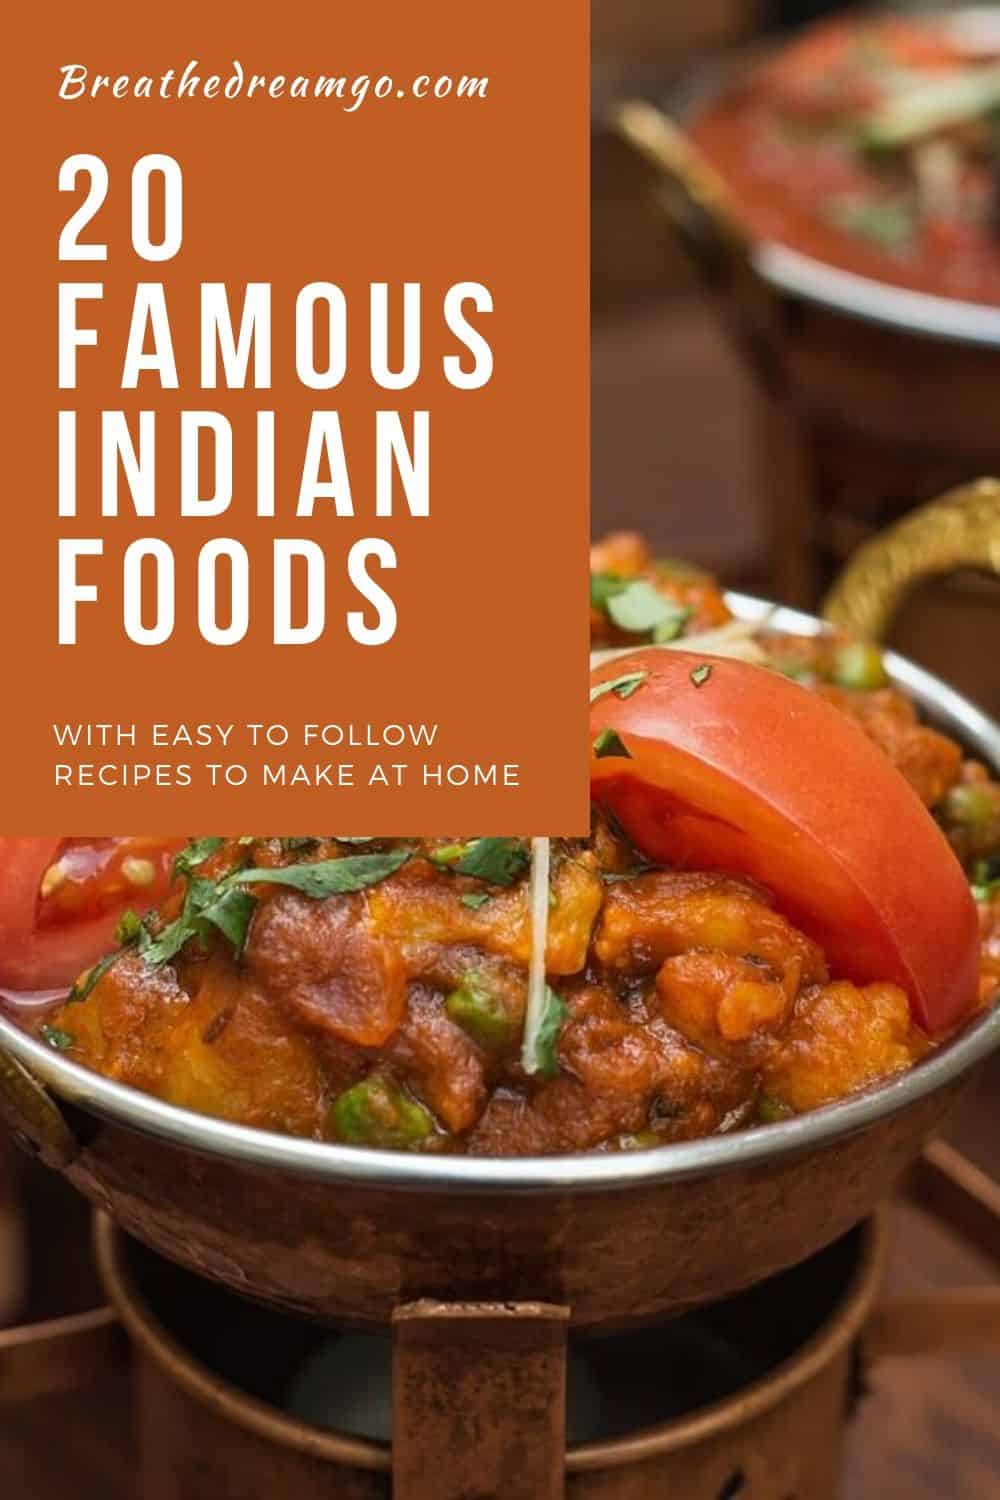 20 Famous Indian Foods with recipes